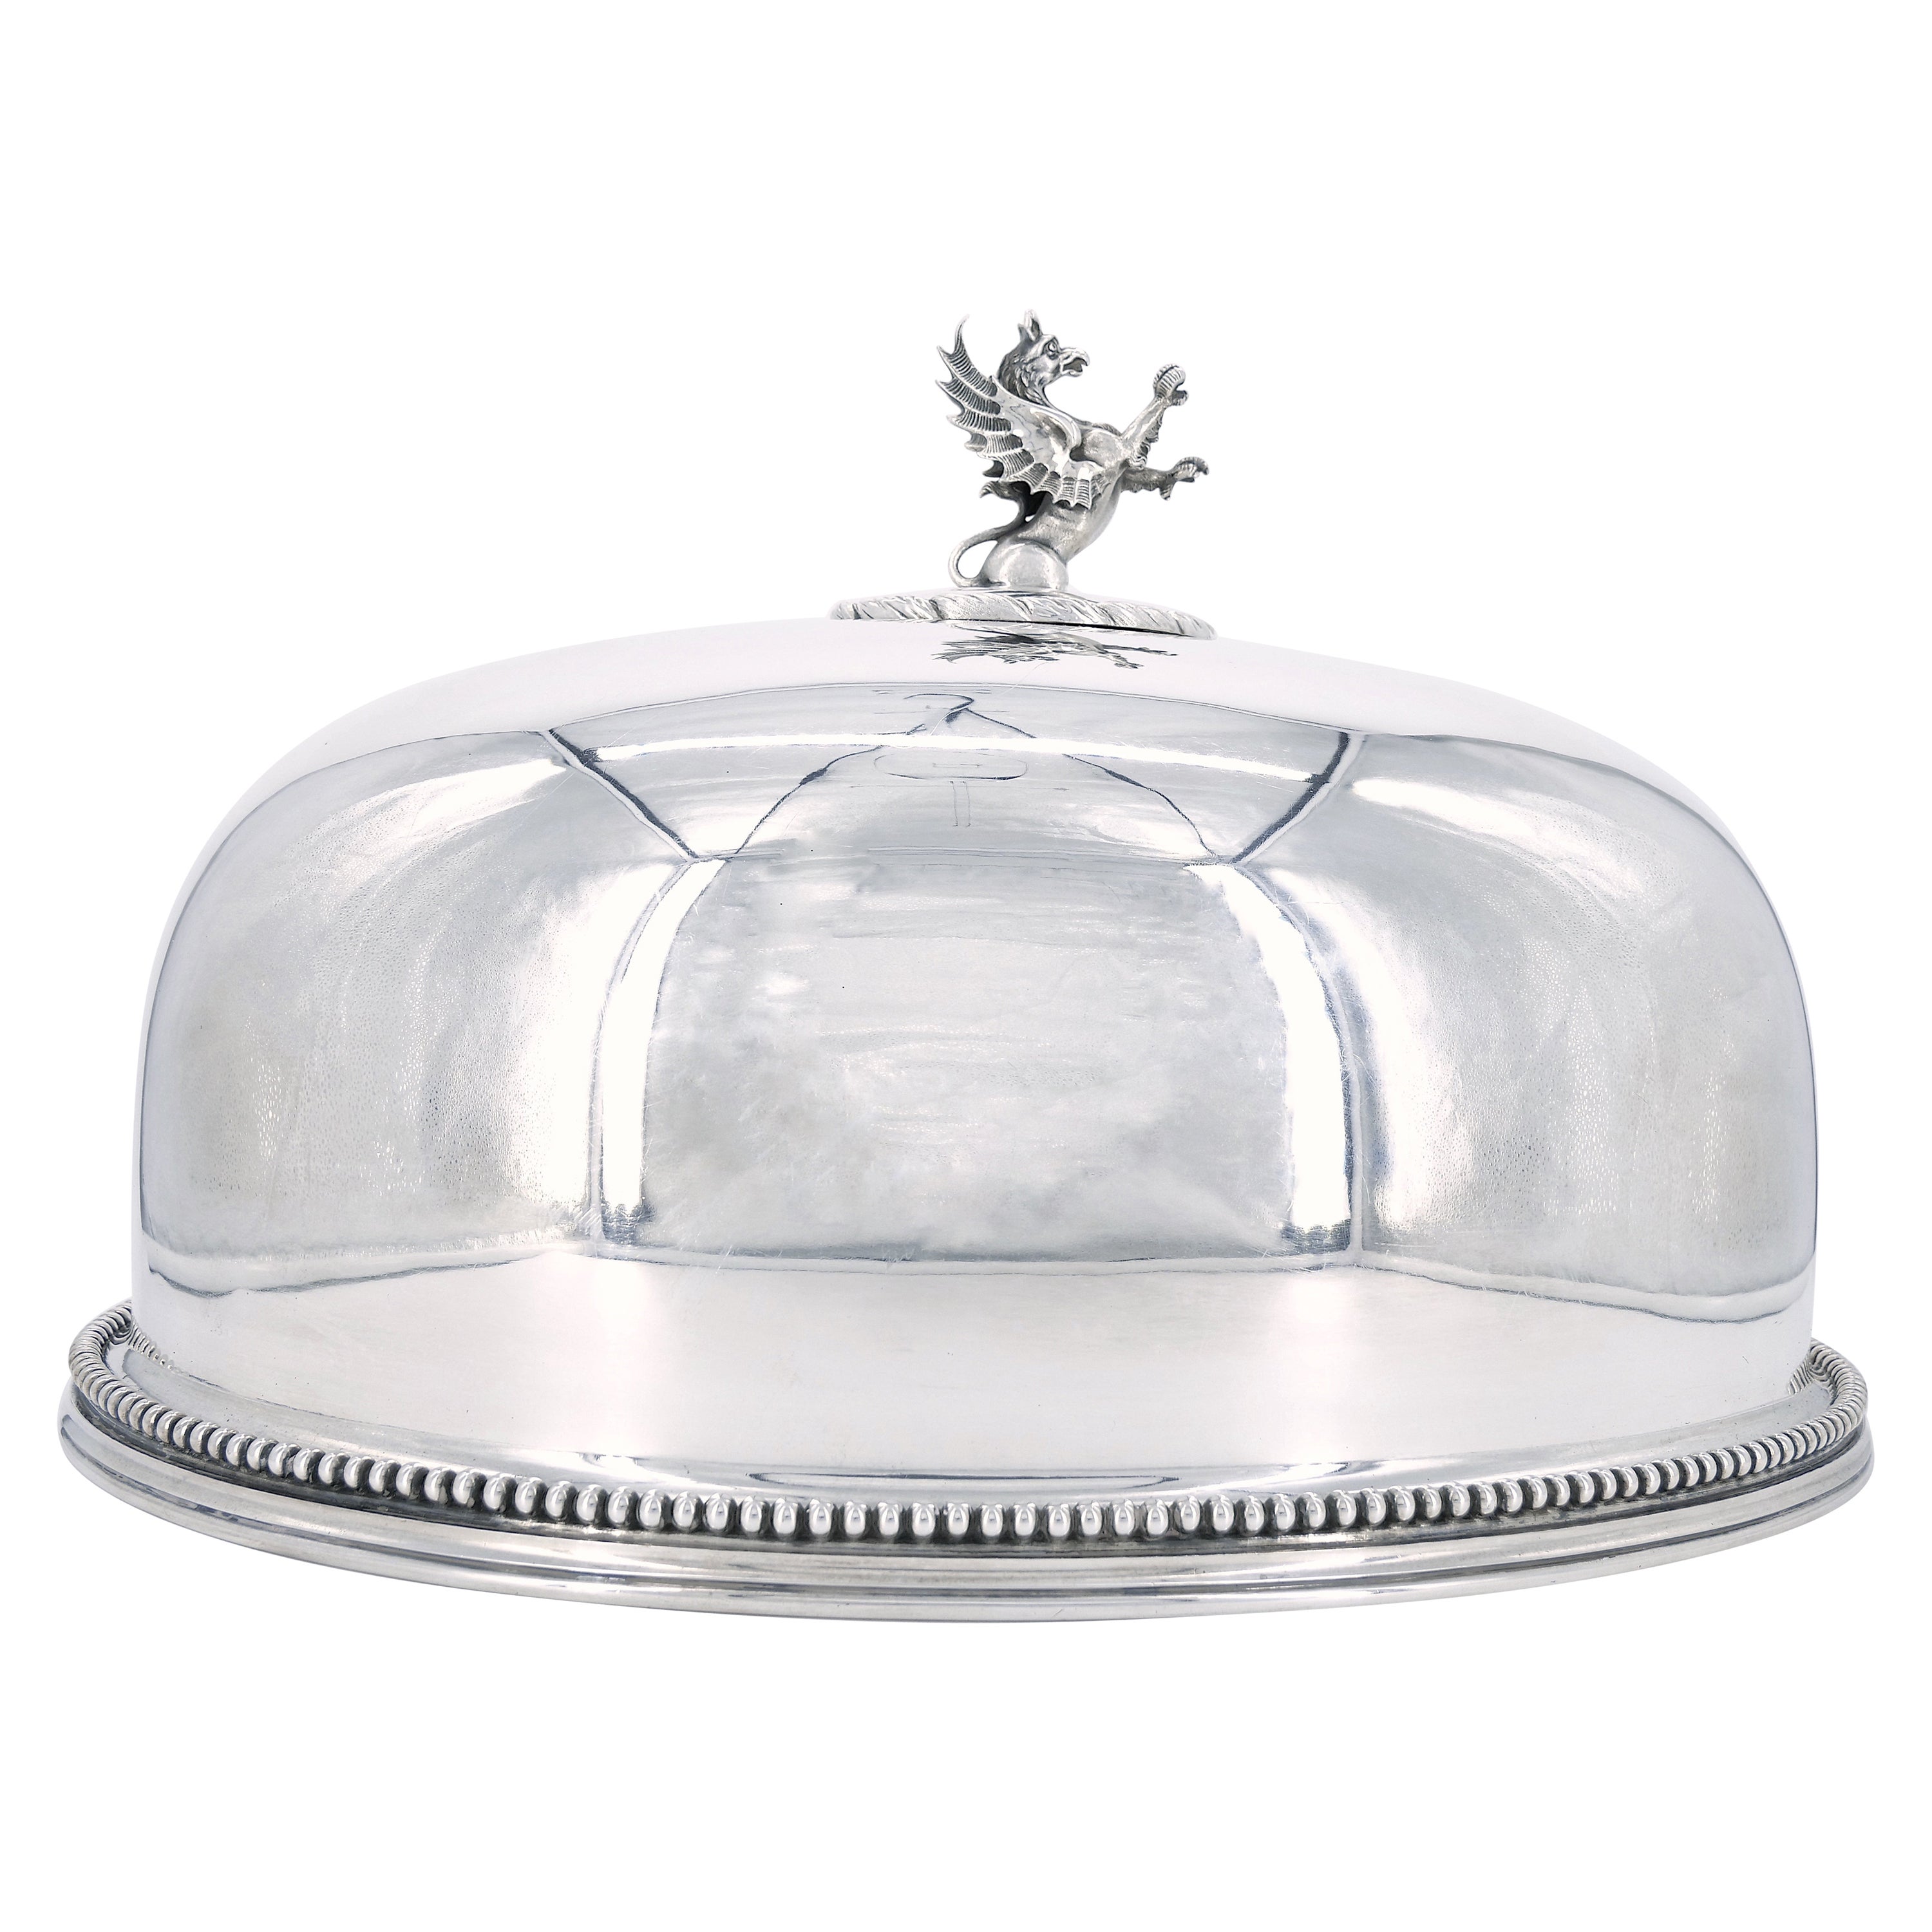 19th Century English Silverplate Meat Dome with Dragon Finial Handle